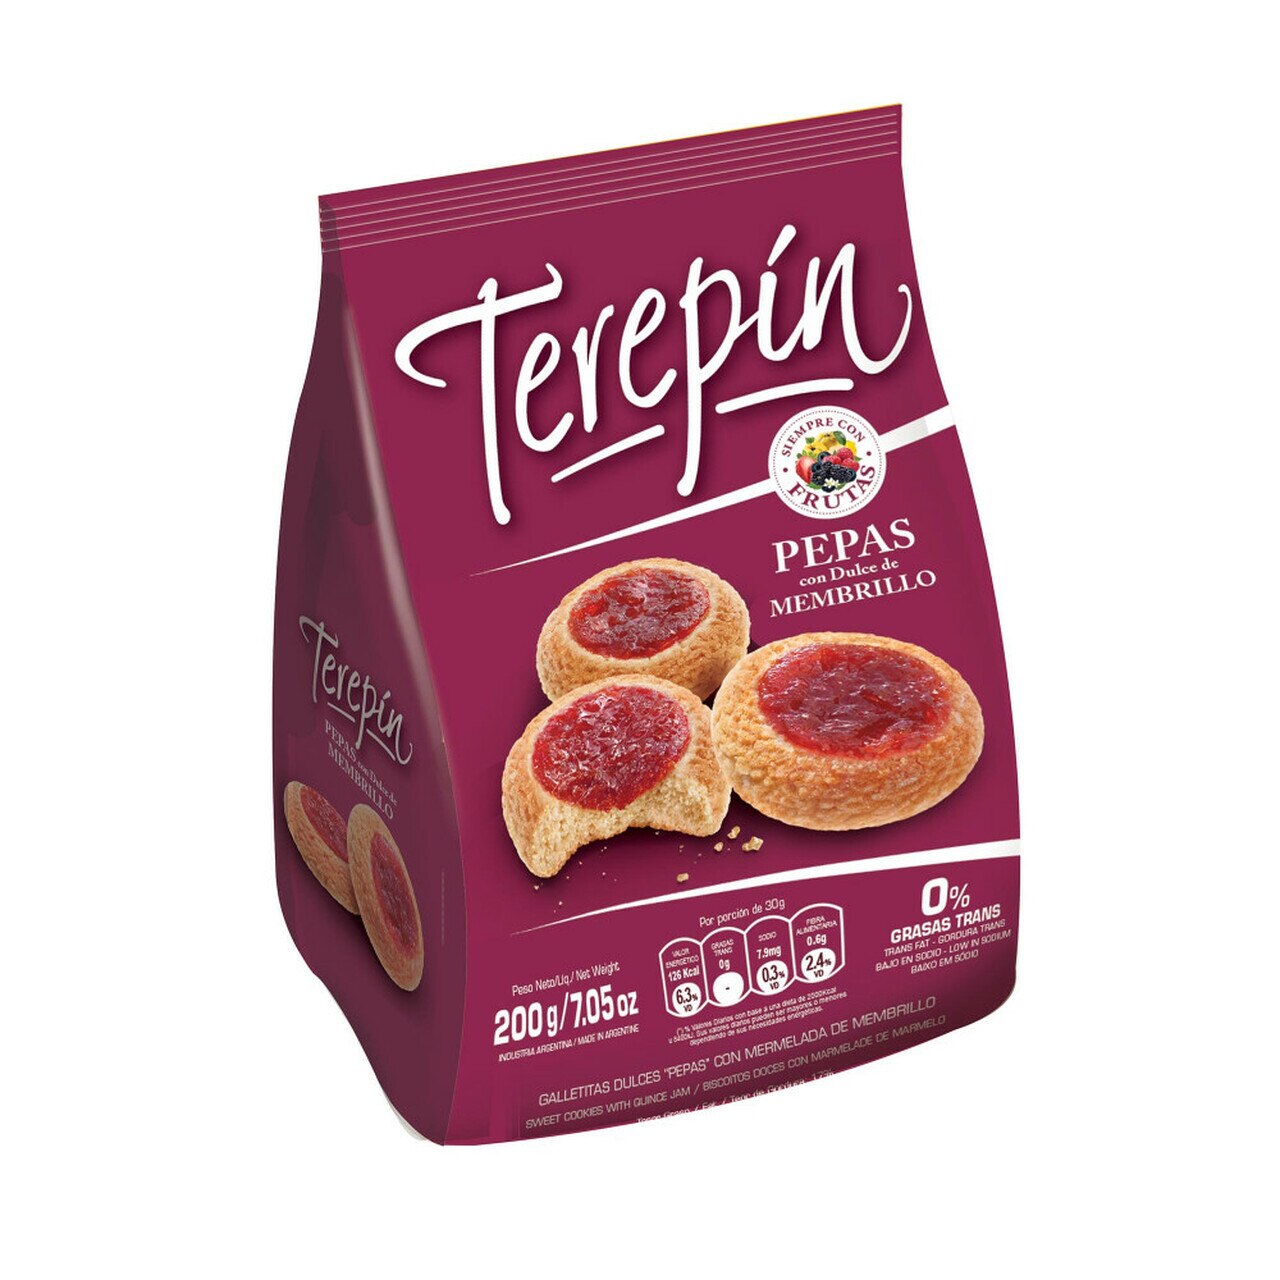 Pepas de membrillo / Sweet cookies with quince jam TEREPIN - ( 400 gr 14.10Oz) San Telmo Market, Argentine Grocery & Restaurant, We Ship All Over USA and CANADA